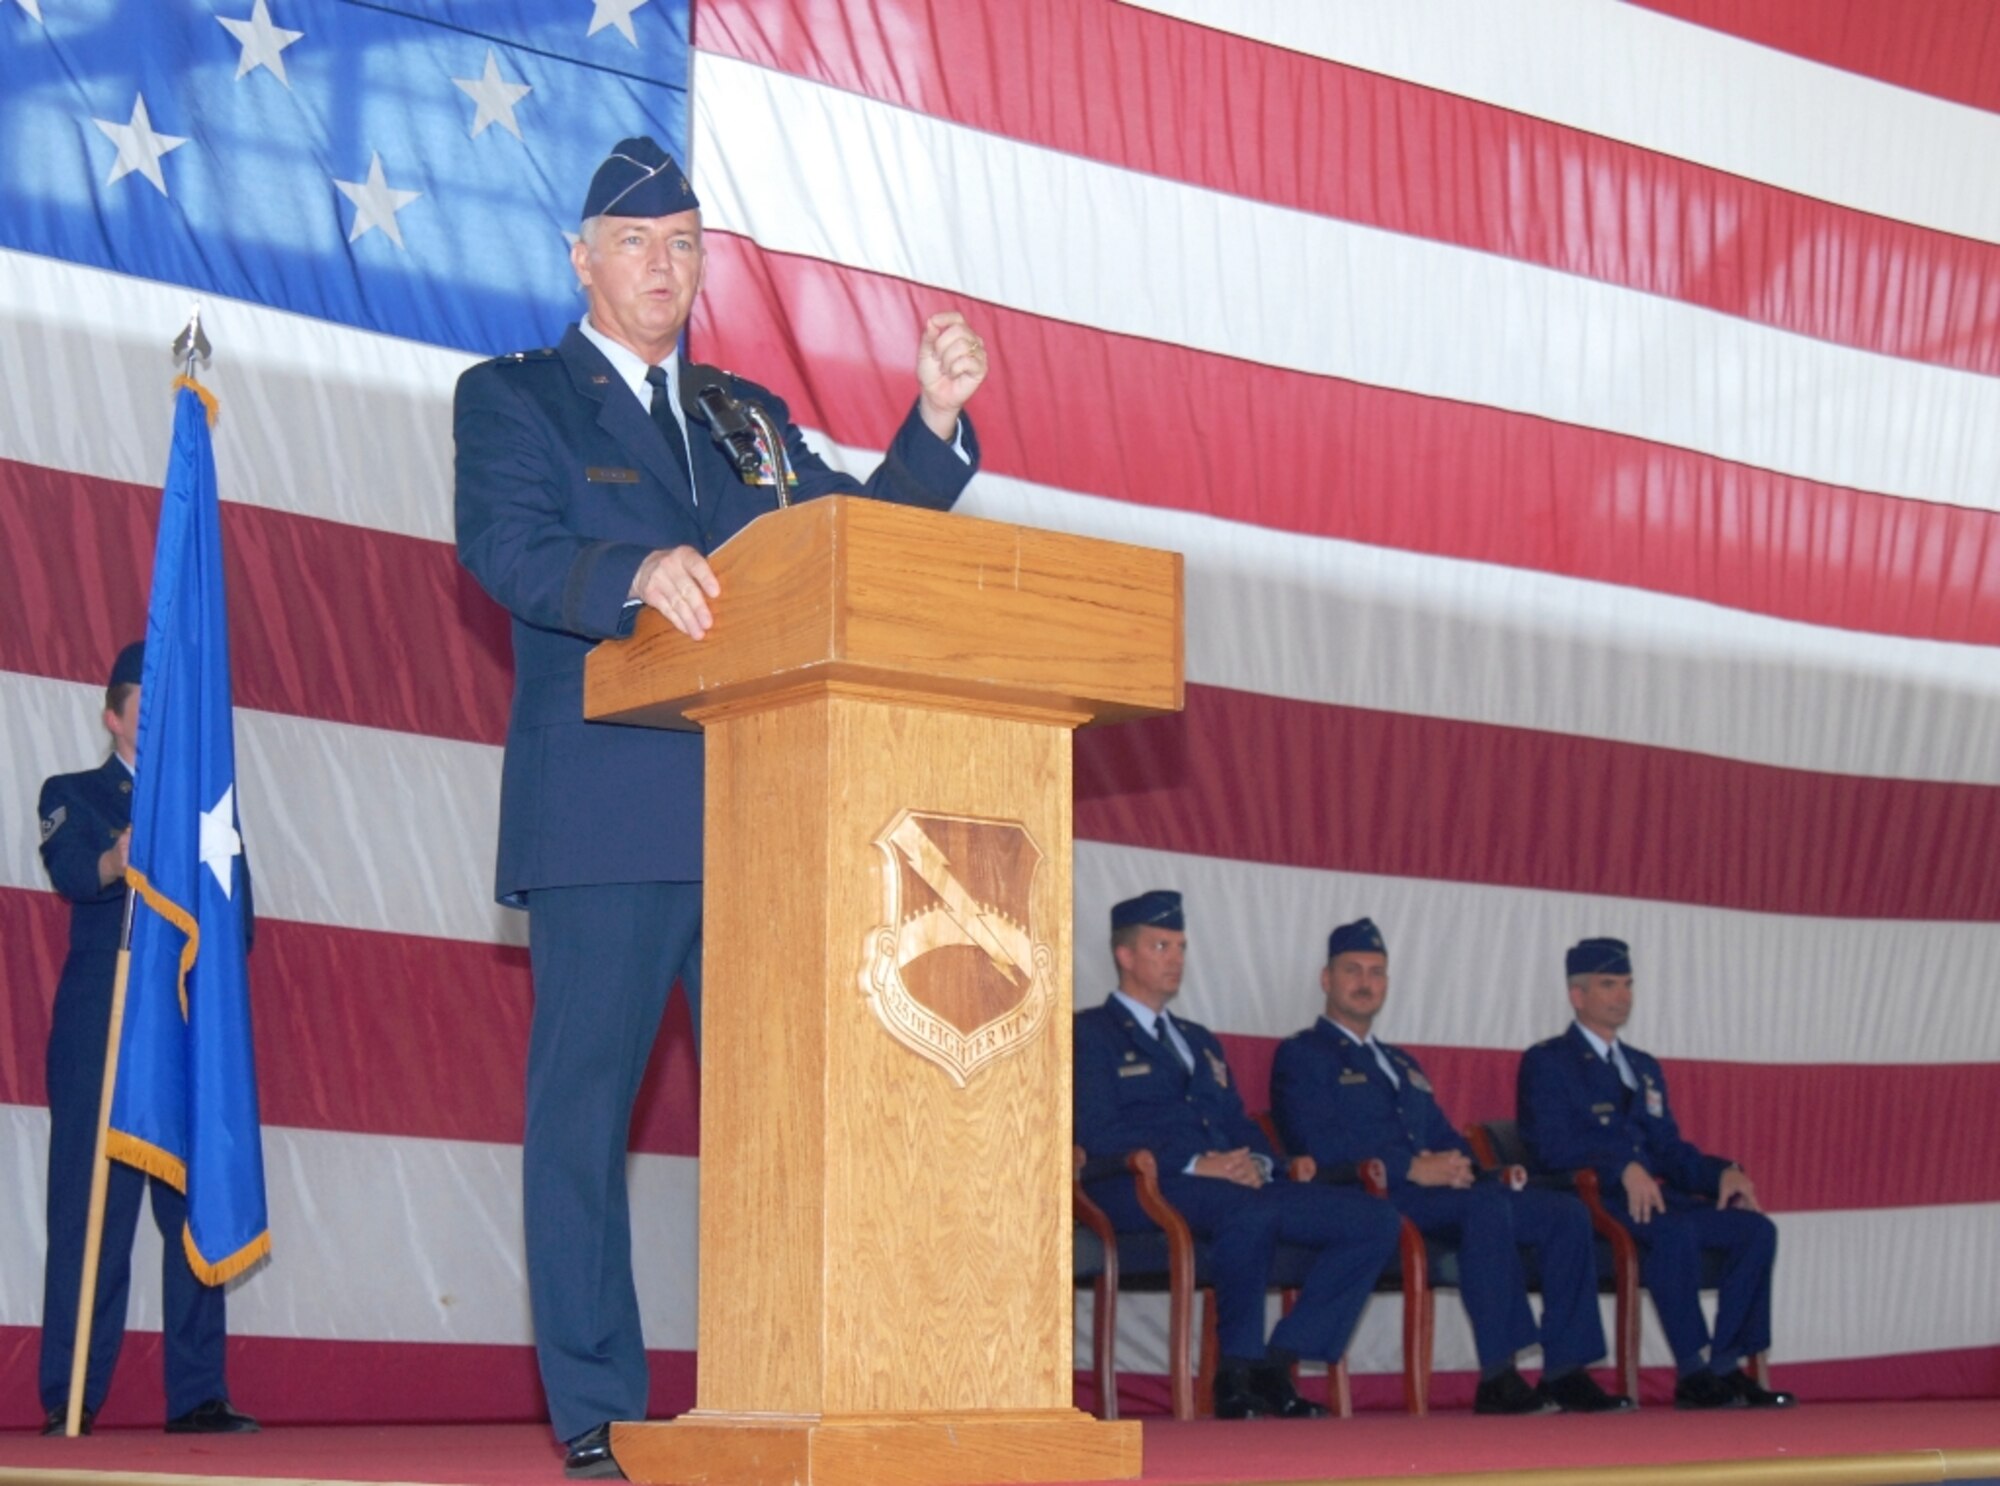 U.S. Air Force Col. Thomas Cucchi, far right, Col. Scott  Barberides, second from right, and Col. Randy Spear, third from right, look on as Brig. Gen. Joseph Balskus addresses family, friends and fellow Airmen during the 101st Air & Space Operations Group (101st AOG) change of command ceremony held here June 11, 2011. This was the very first change of command ceremony for the 101st AOG, which was officially activated July 1, 2009. (U.S. Air Force photo by Maj. Steve Burke/Released)
